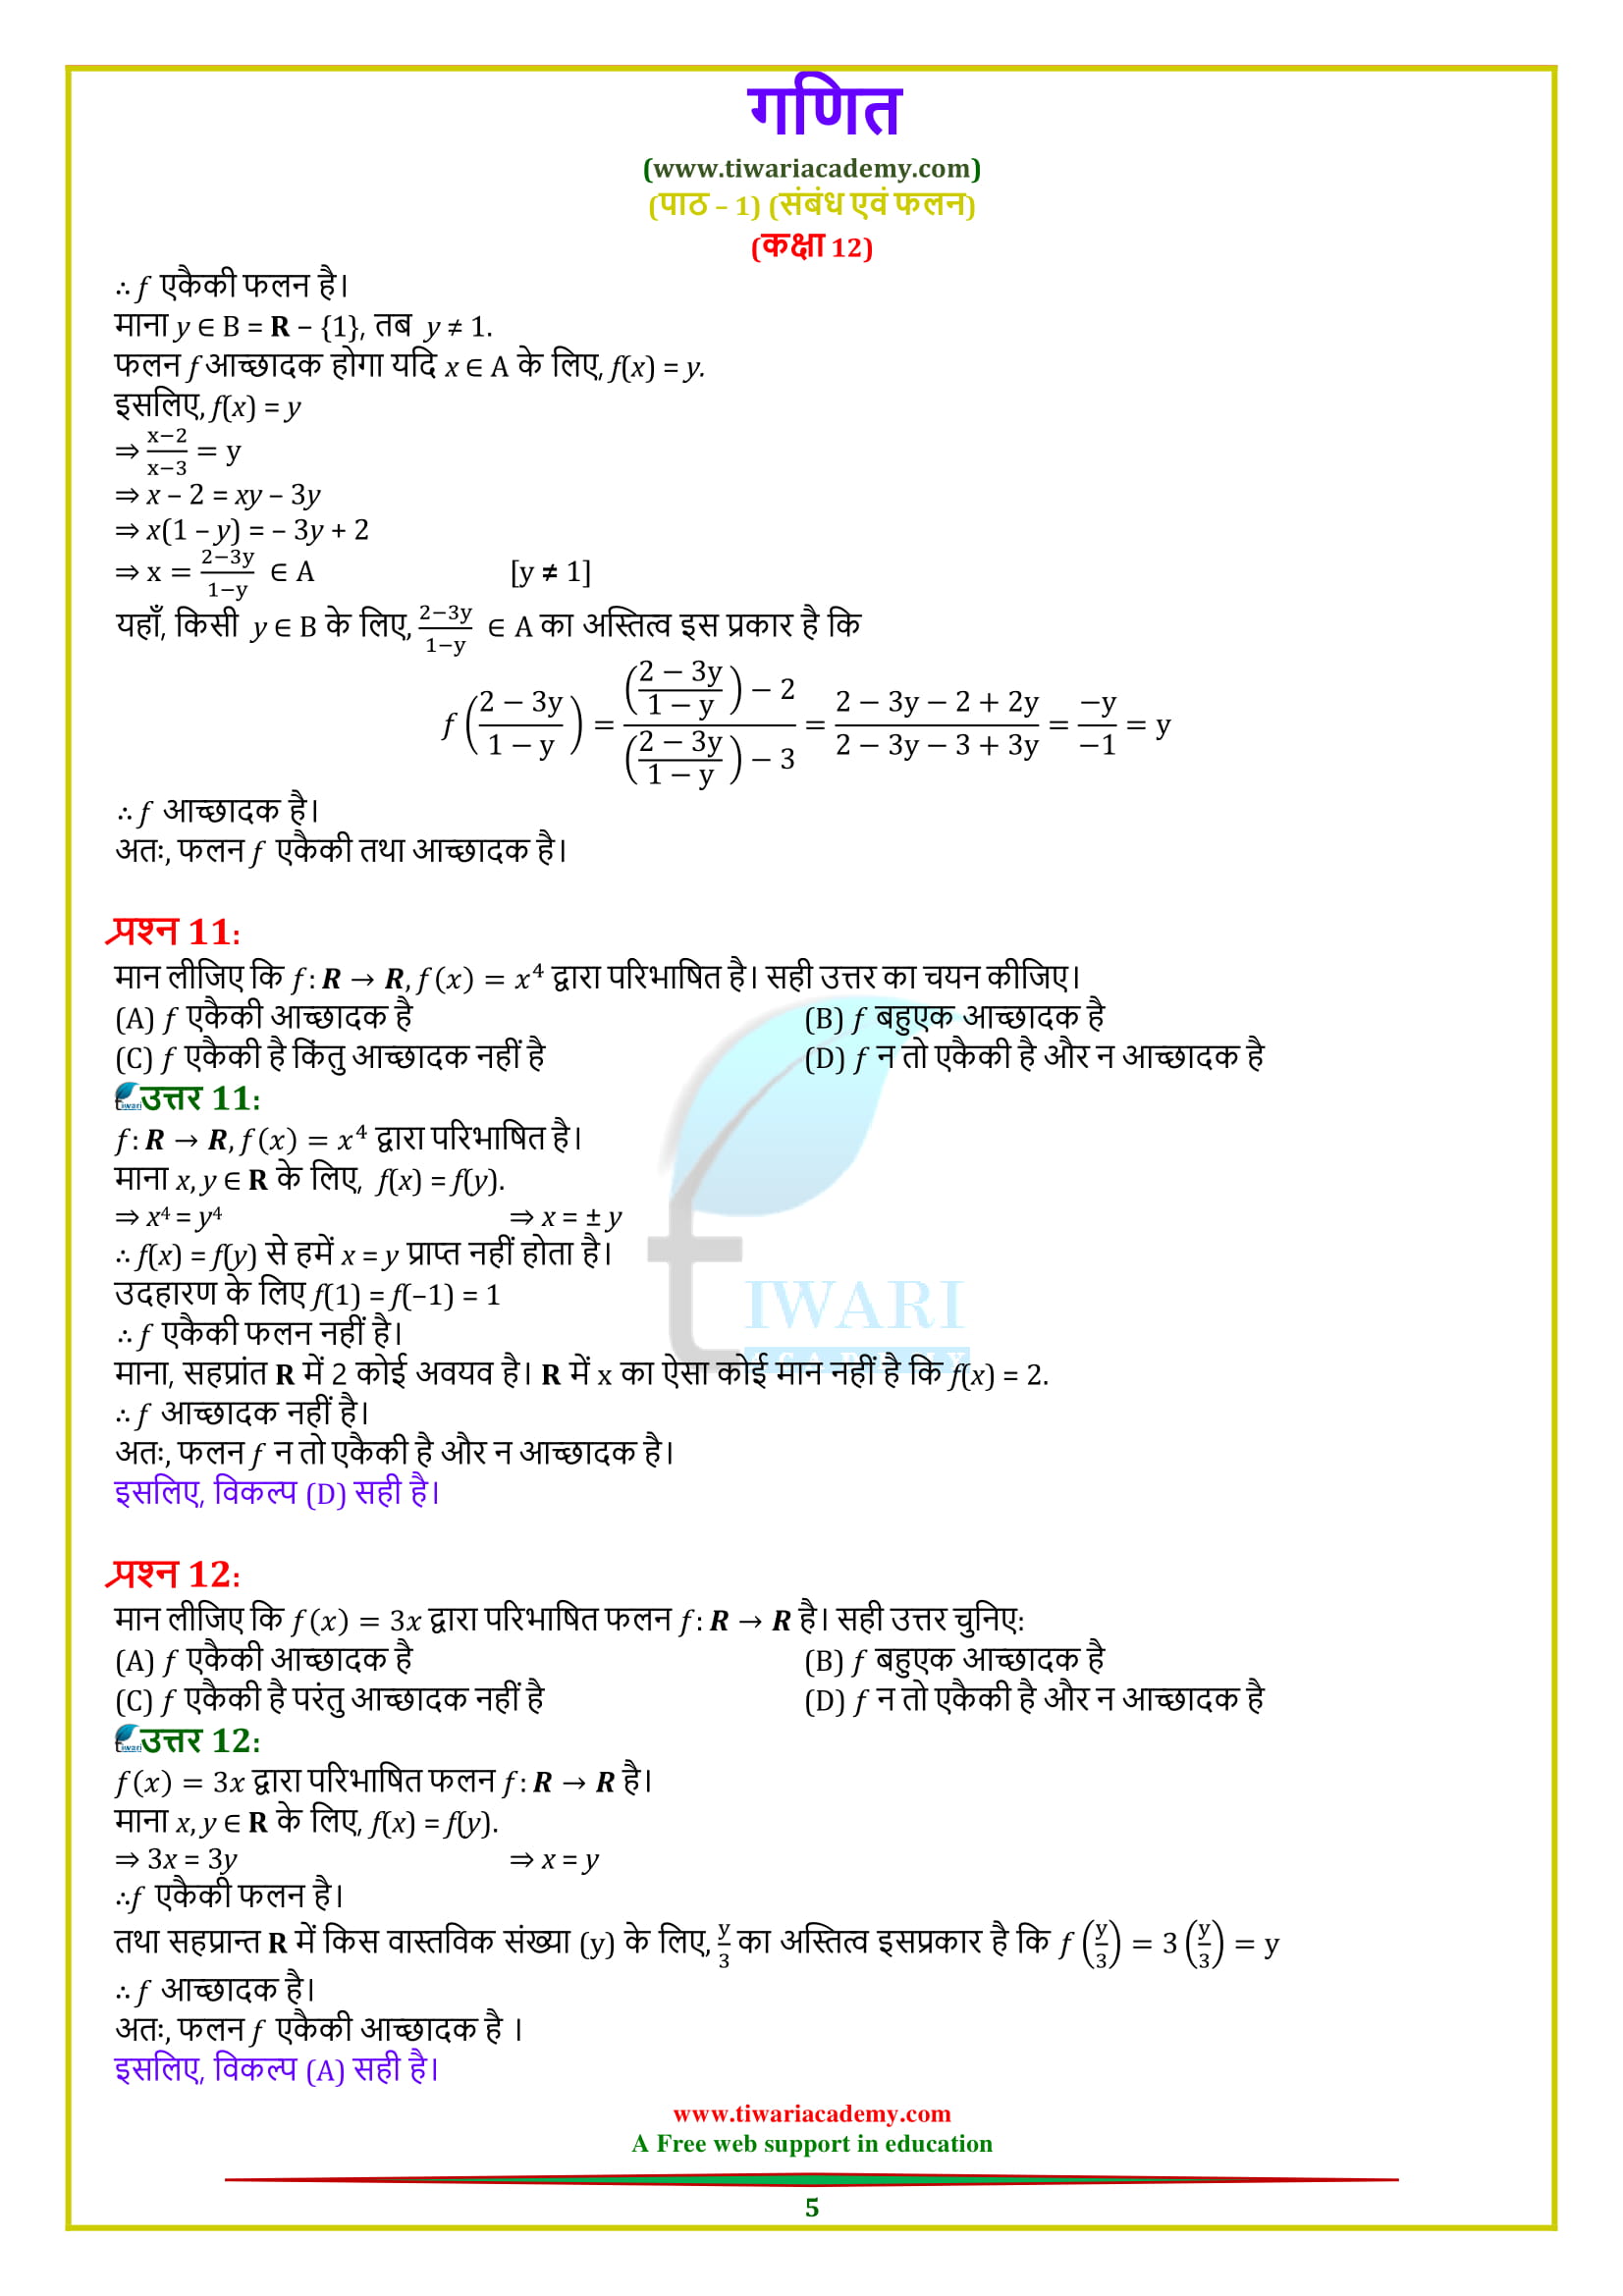 NCERT Solutions for Class 12 Maths Chapter 1 Exercise 1.2 all questions in hindi.